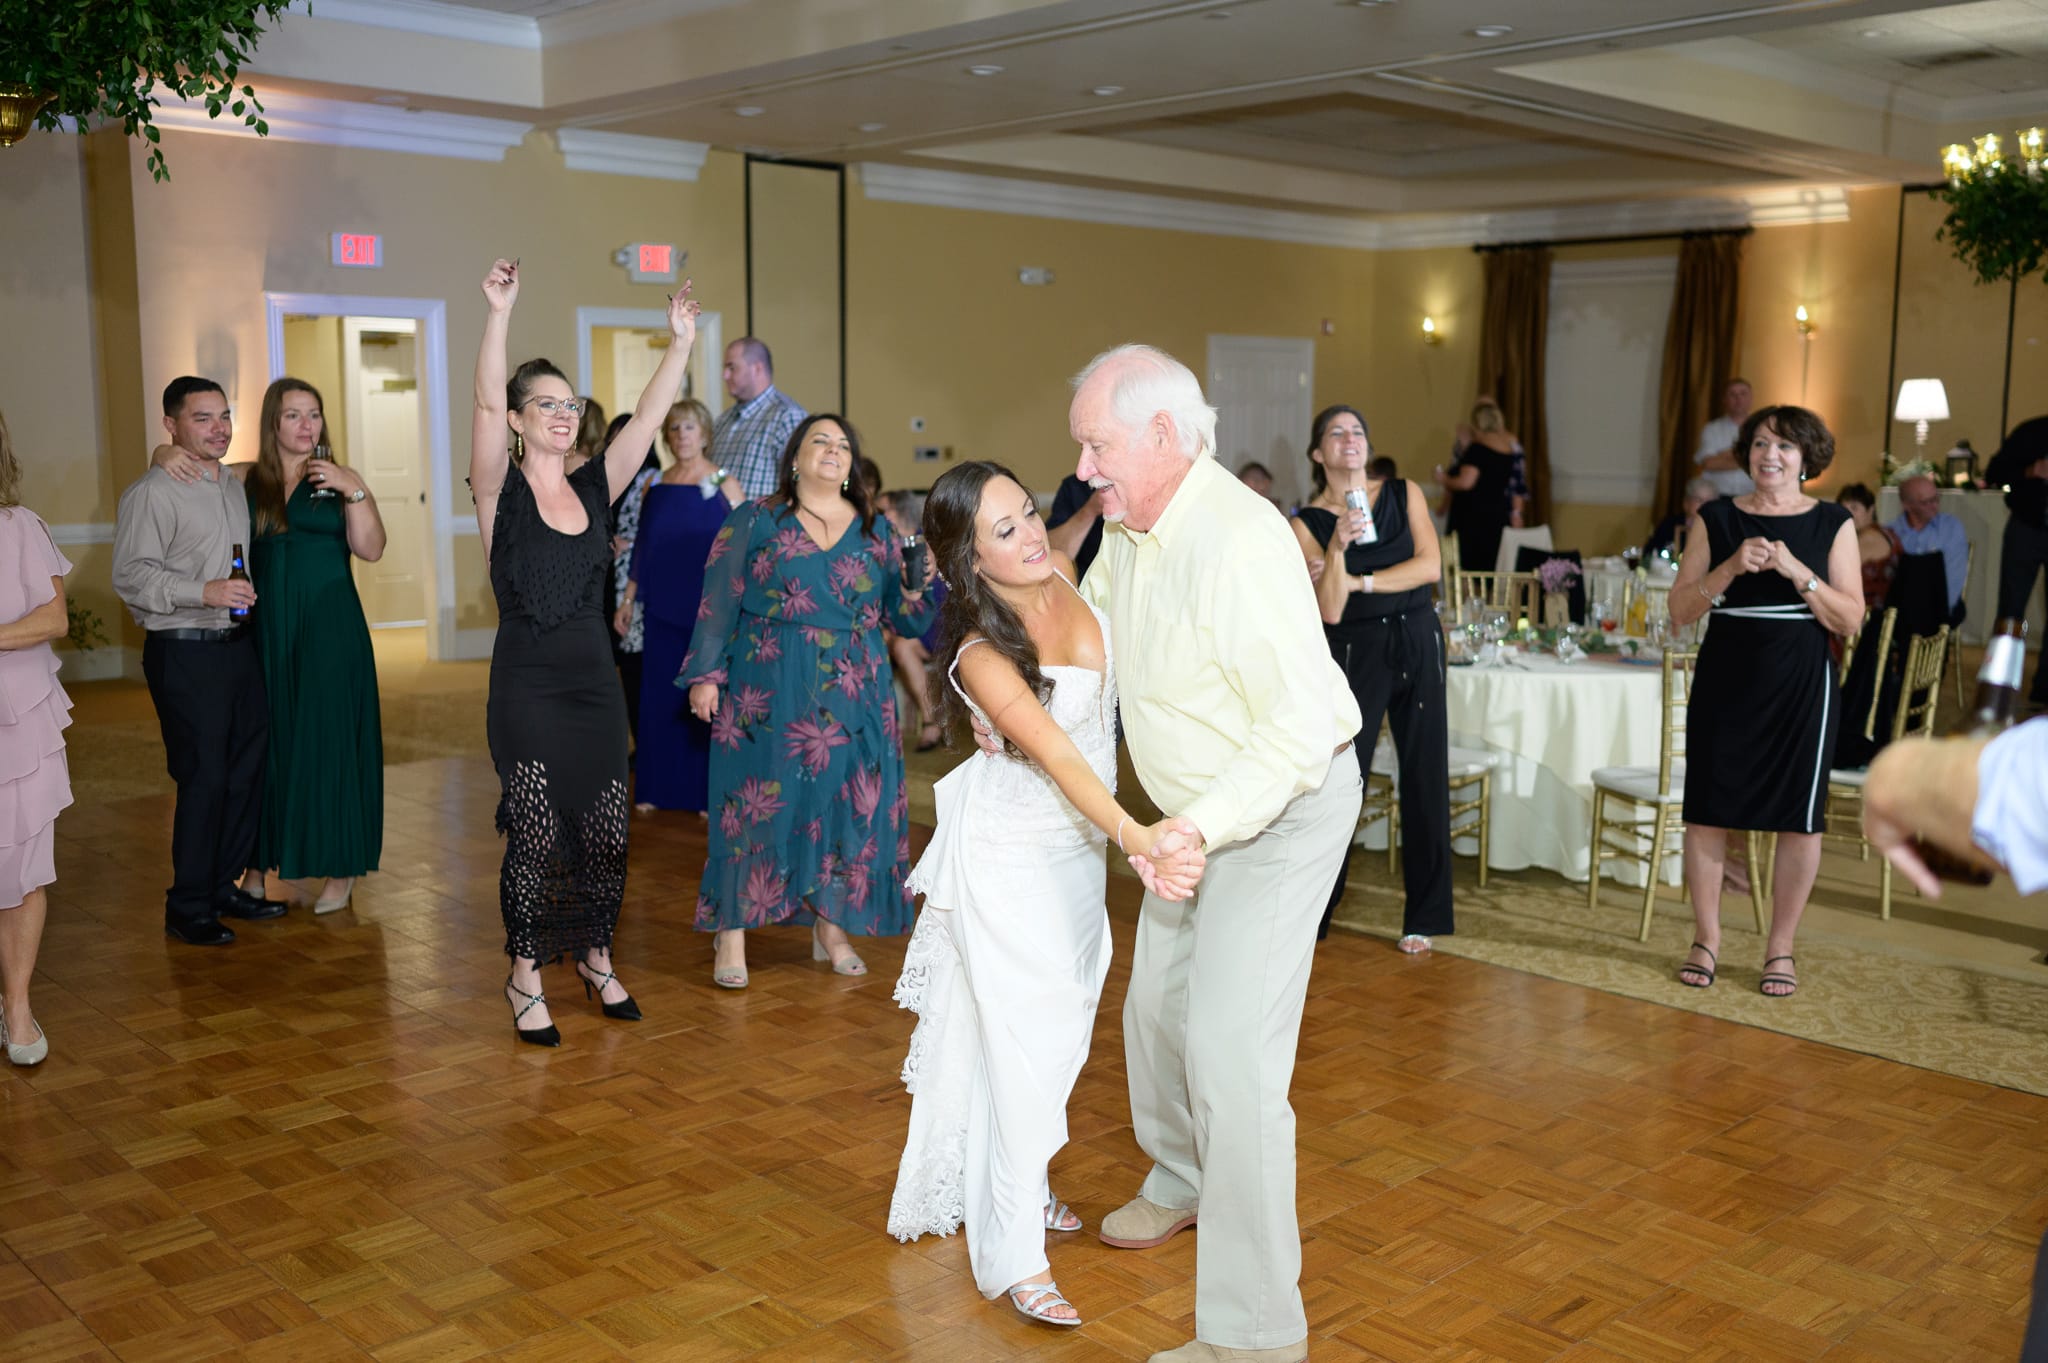 Lots of fun on the dance floor during the reception - Pawleys Plantation